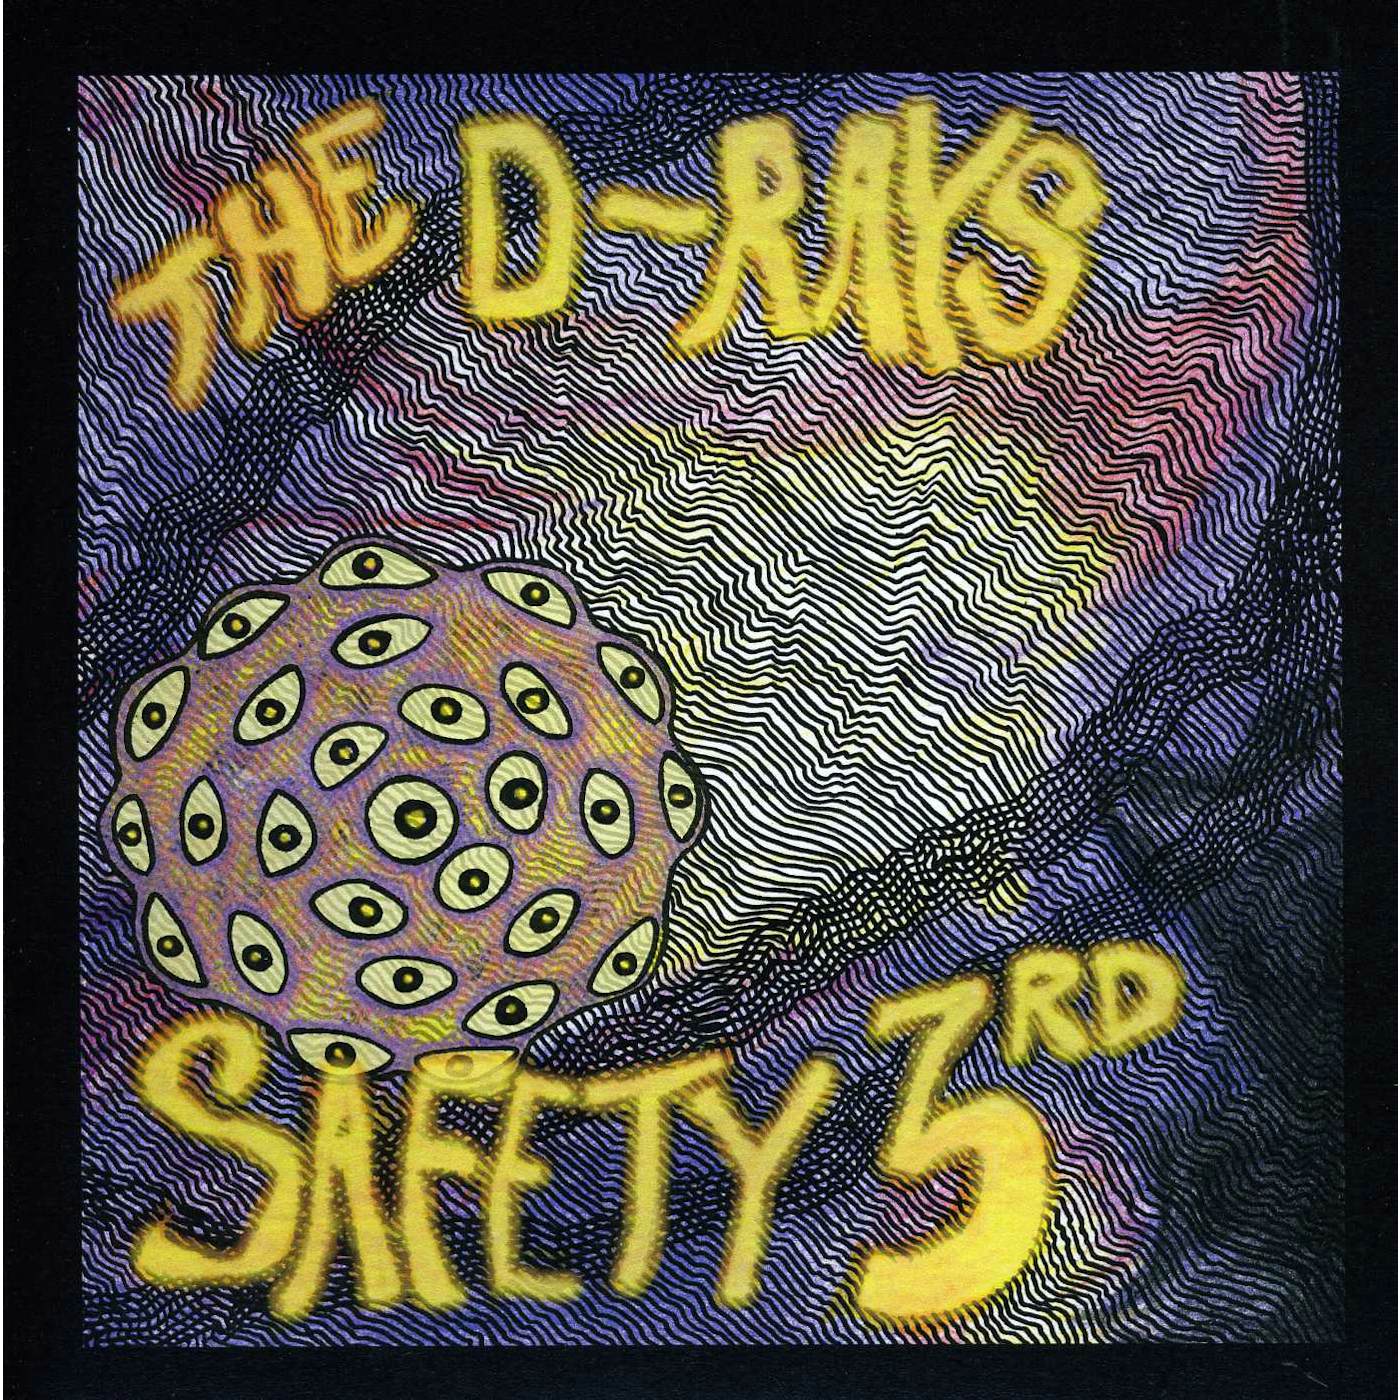 The D-Rays SAFETY 3RD Vinyl Record